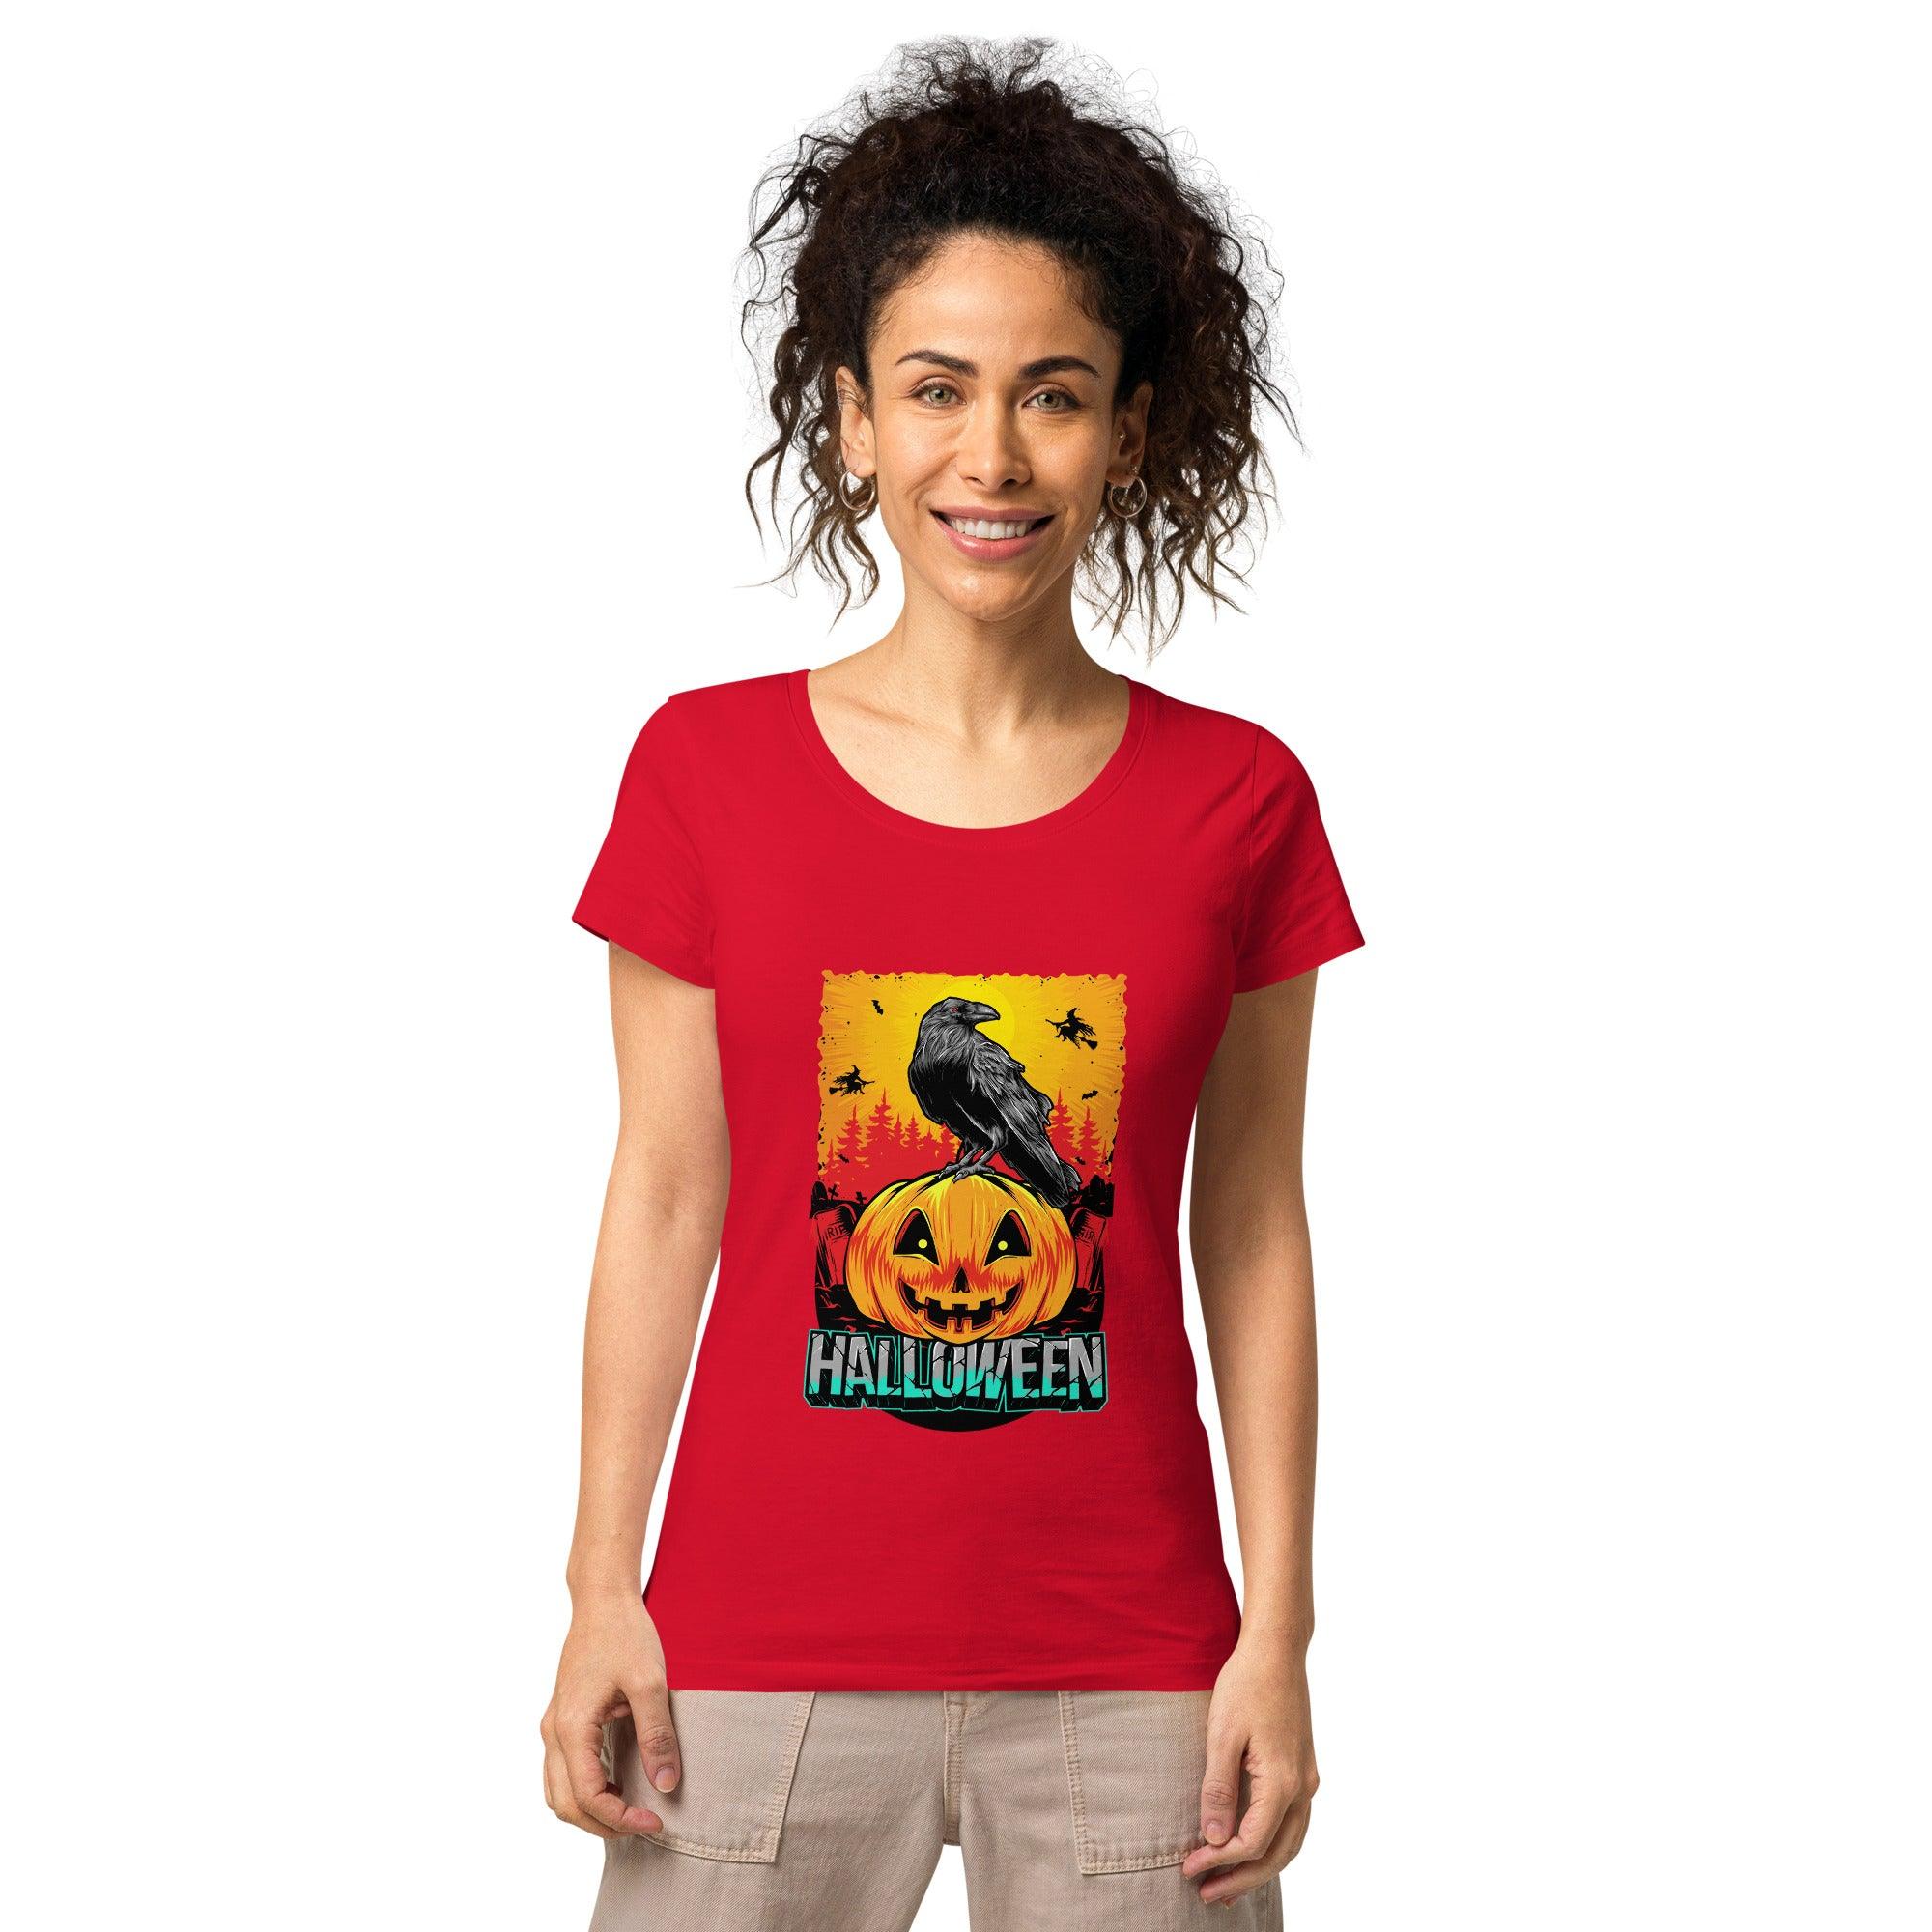 Elegant women's Halloween tee showcasing the phases of the moon, perfect for celestial admirers.